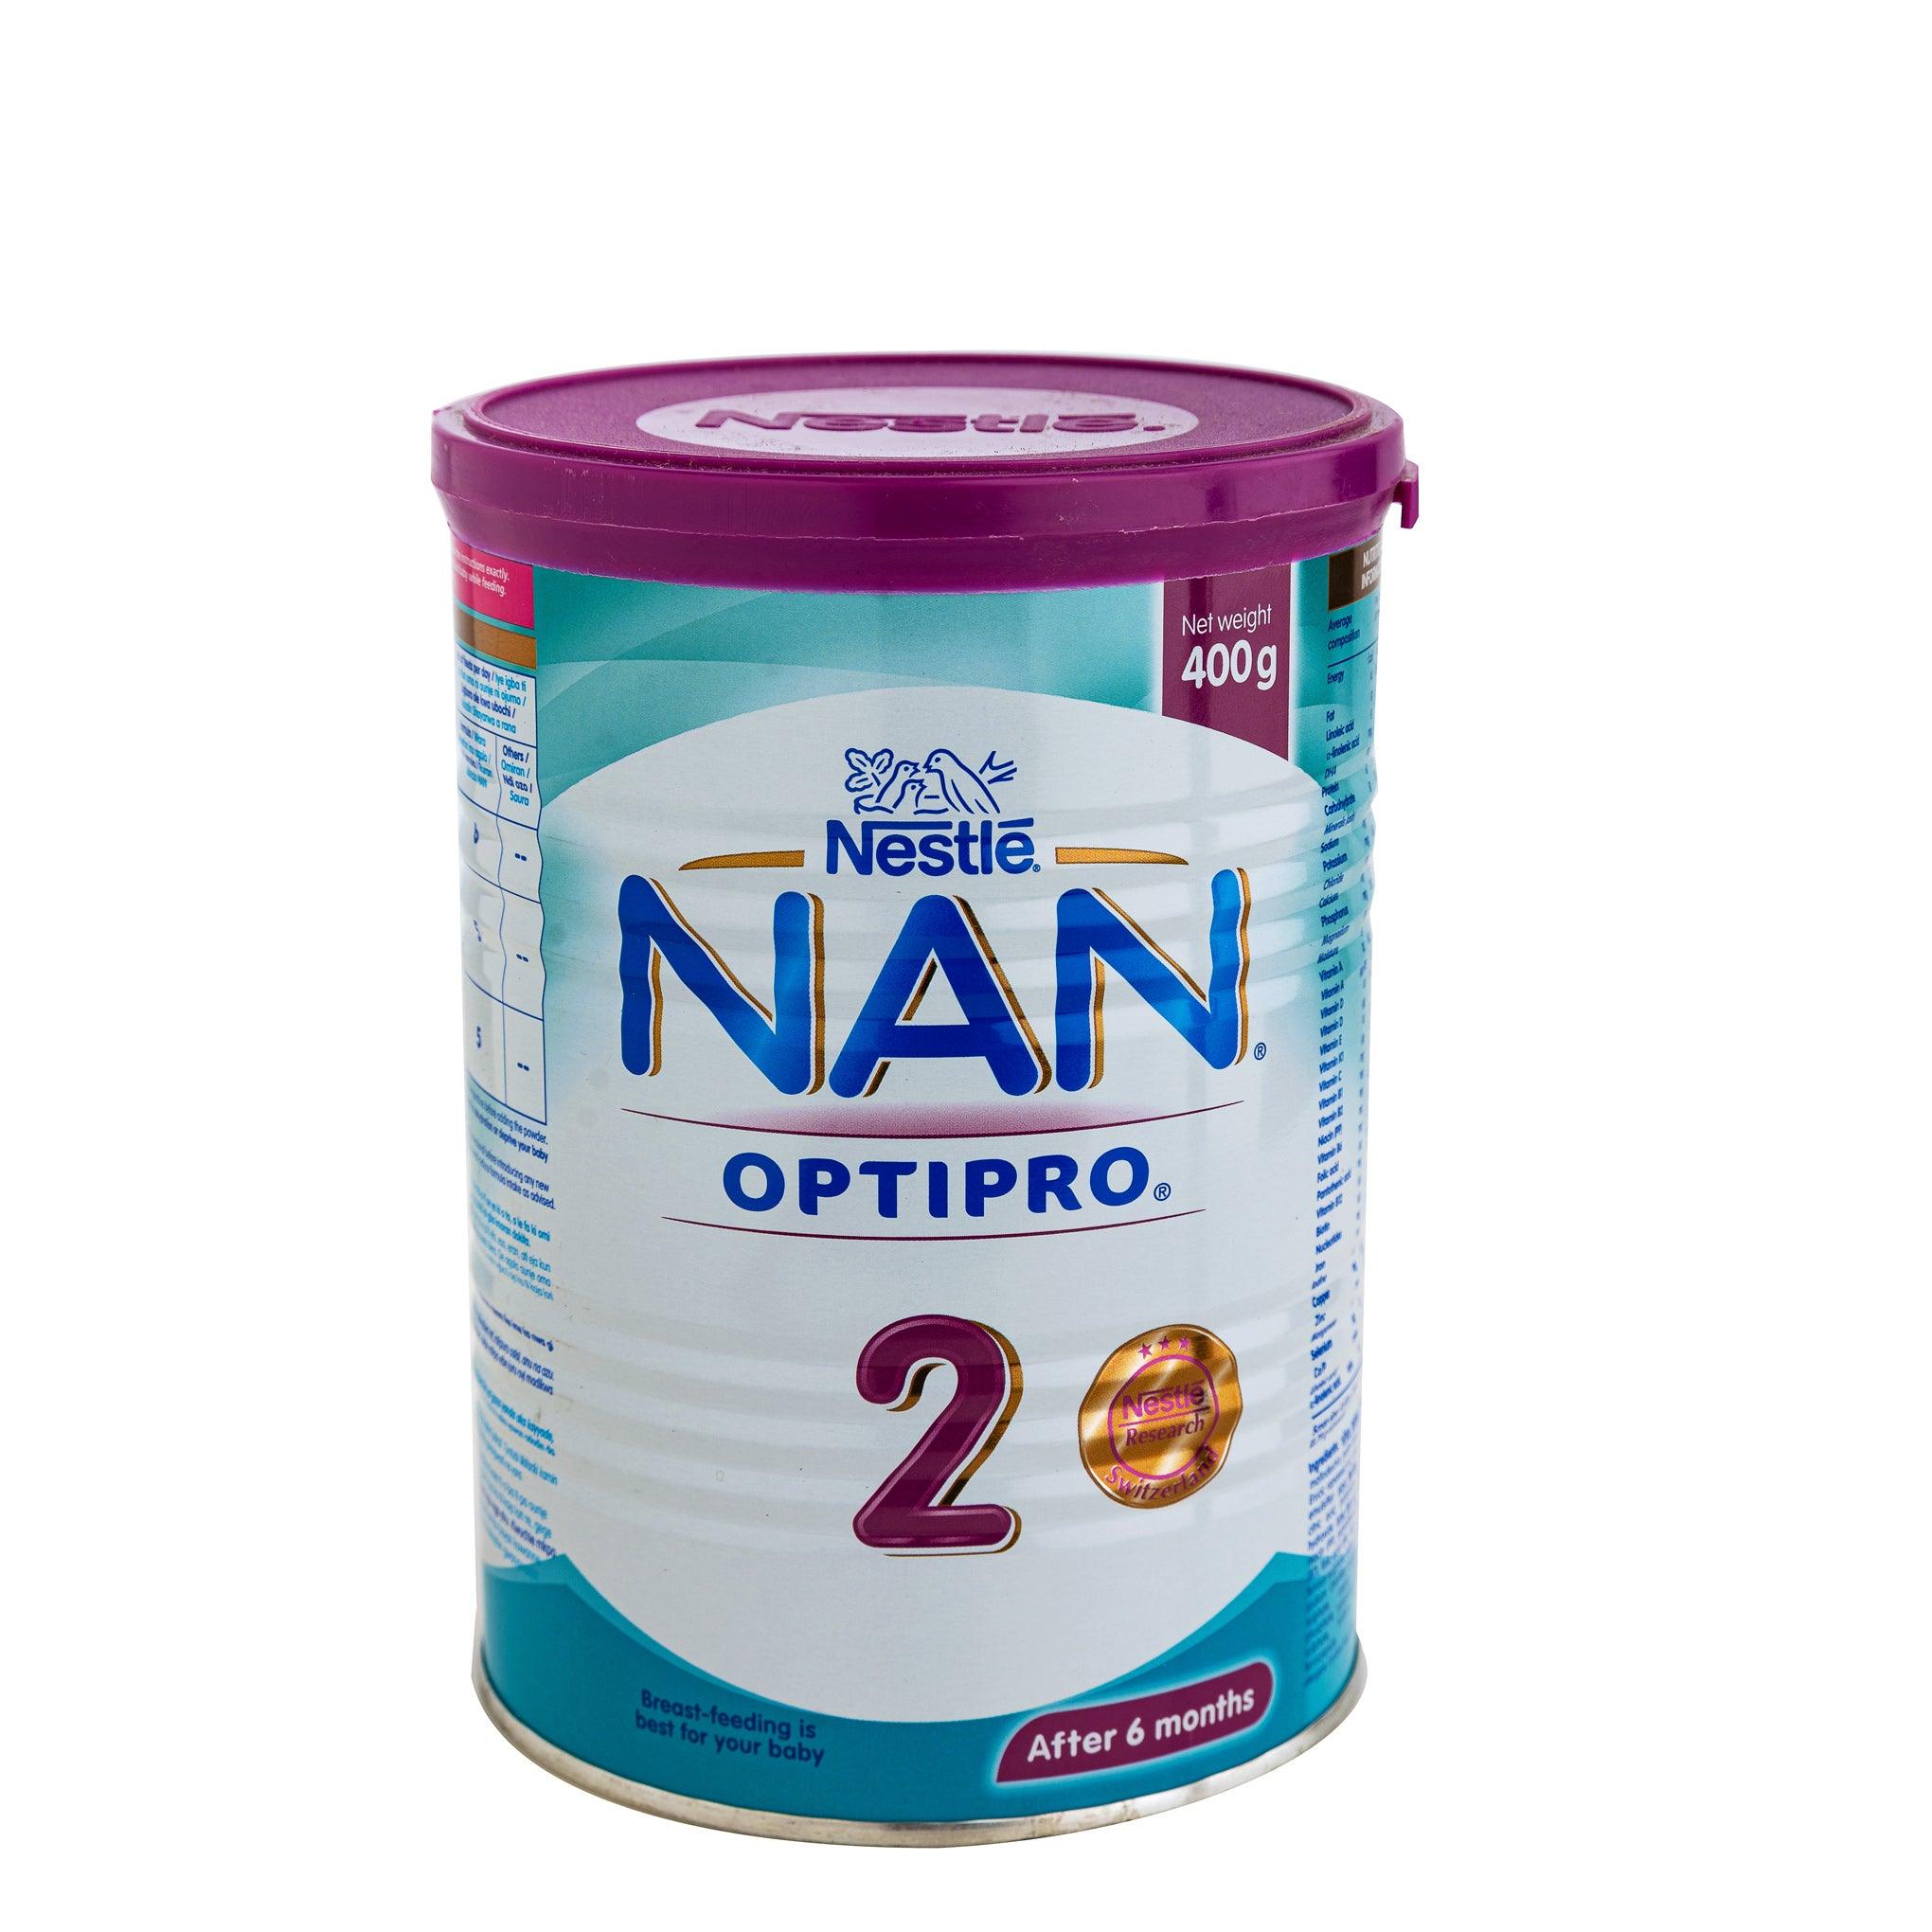 shop Nestle Nan 2 After 6month from HealthPlus online pharmacy in Nigeria